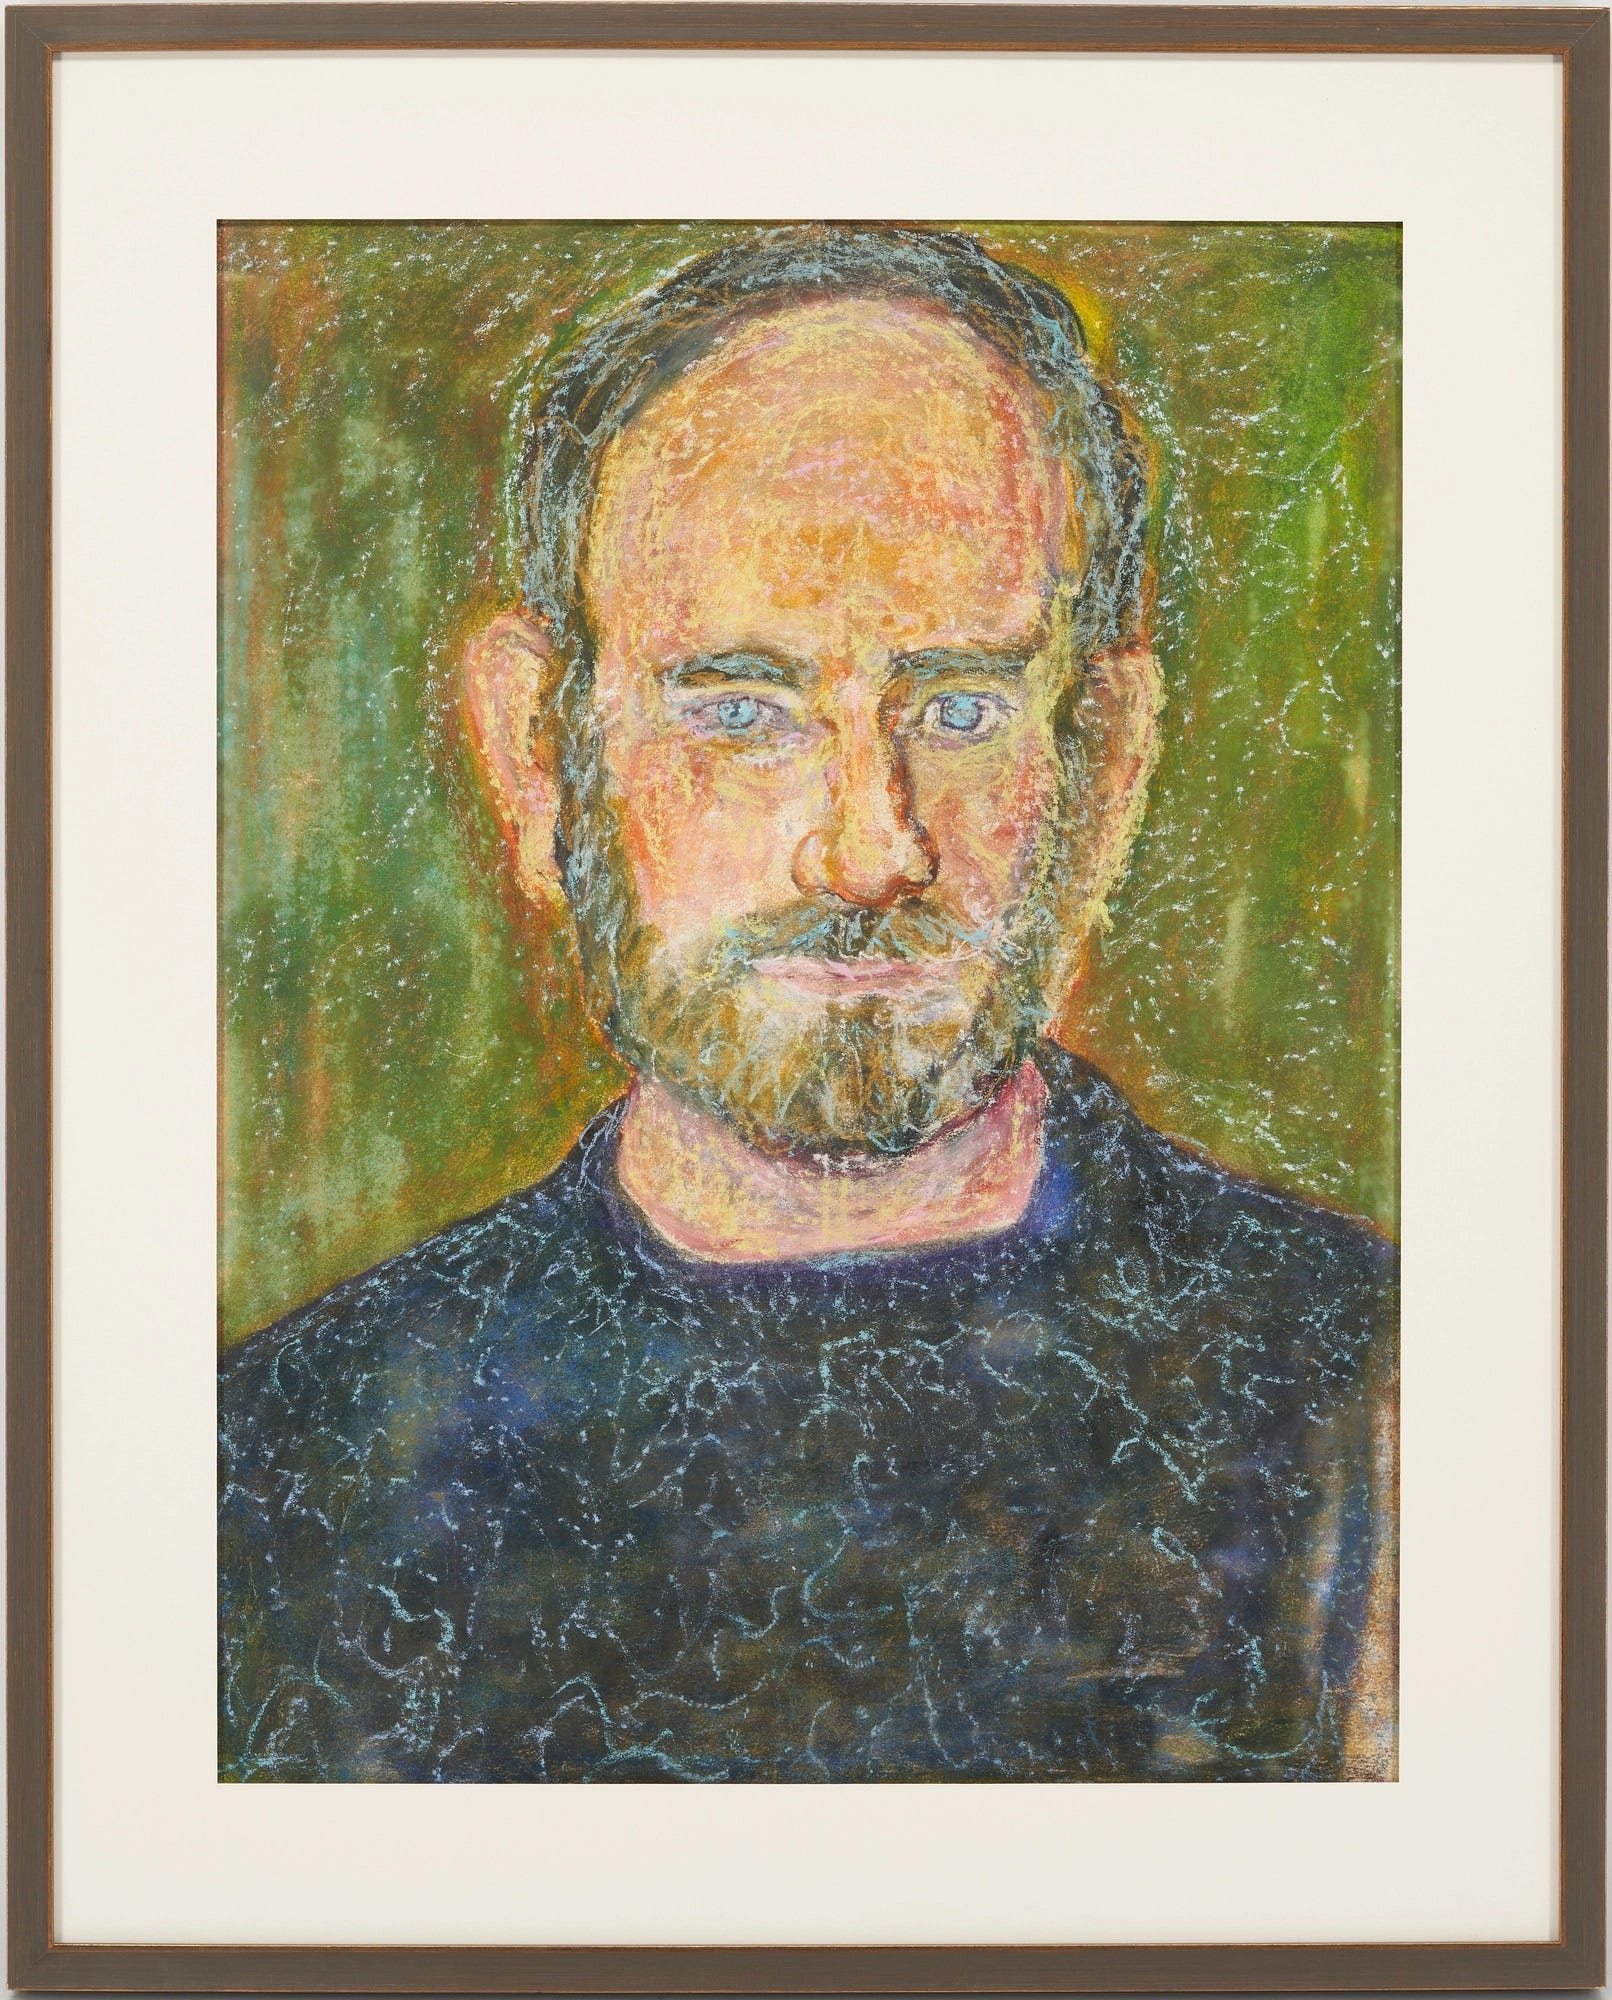 A pastel painting entitled “Portrait of a Man” by renowned artist and Knoxville native Beauford Delaney is up for auction by Case Auctions on Jan. 28, 2023.